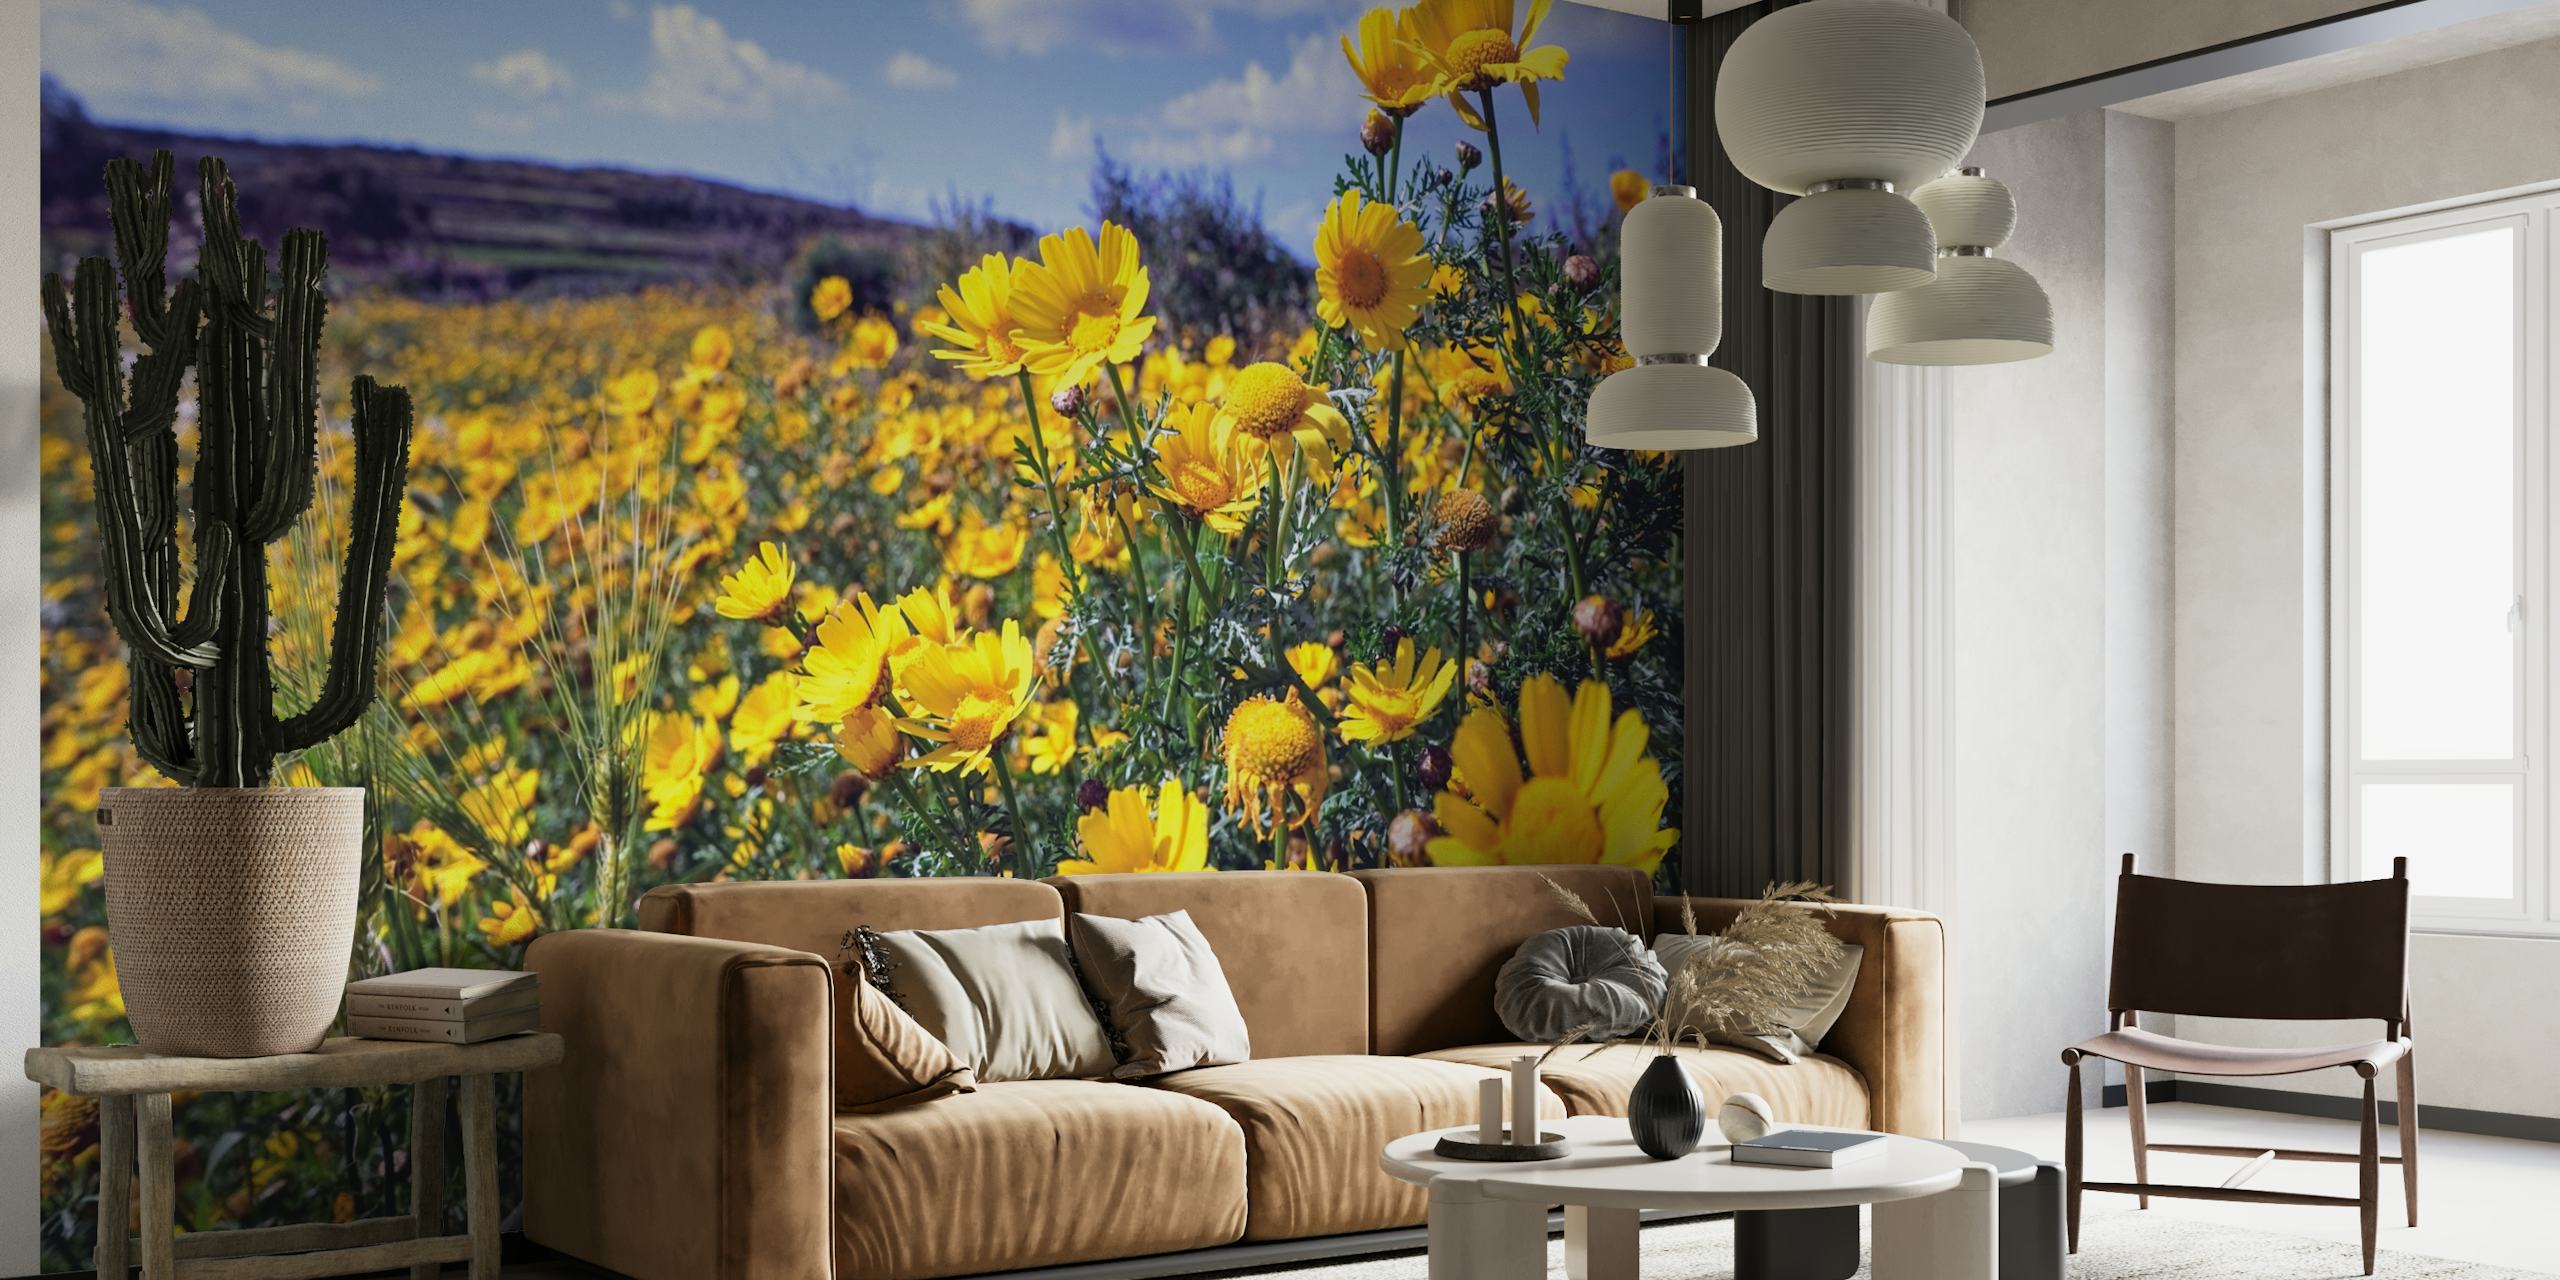 Sunlit Daisy Flower Fields mural with vibrant yellow daisies against a bright blue sky